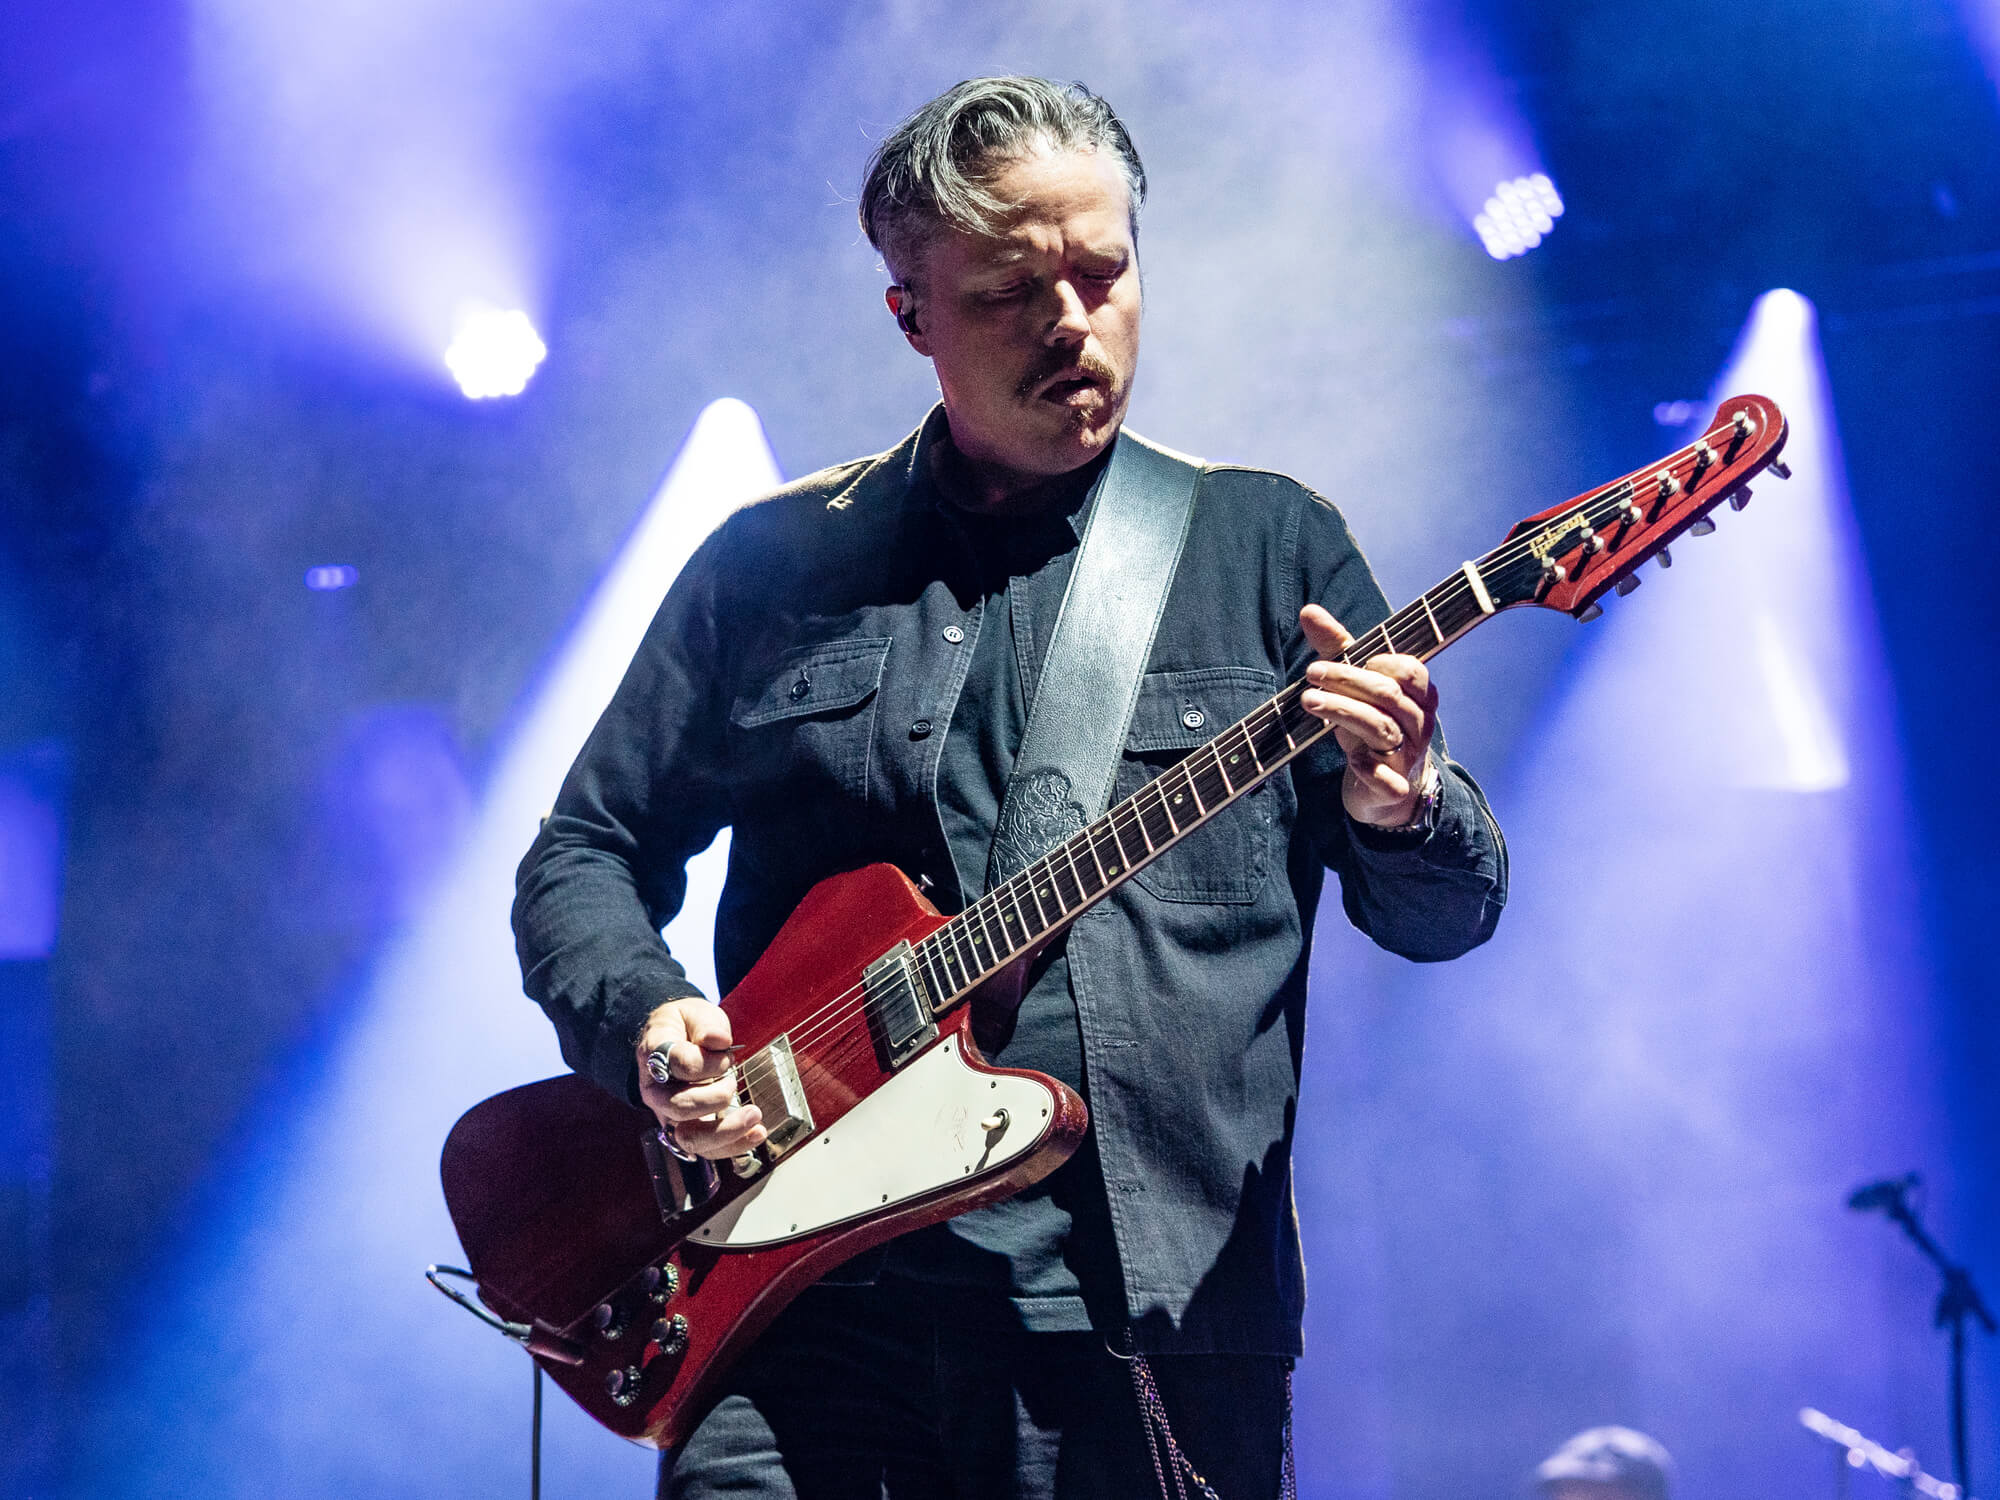 Jason Isbell playing the guitar